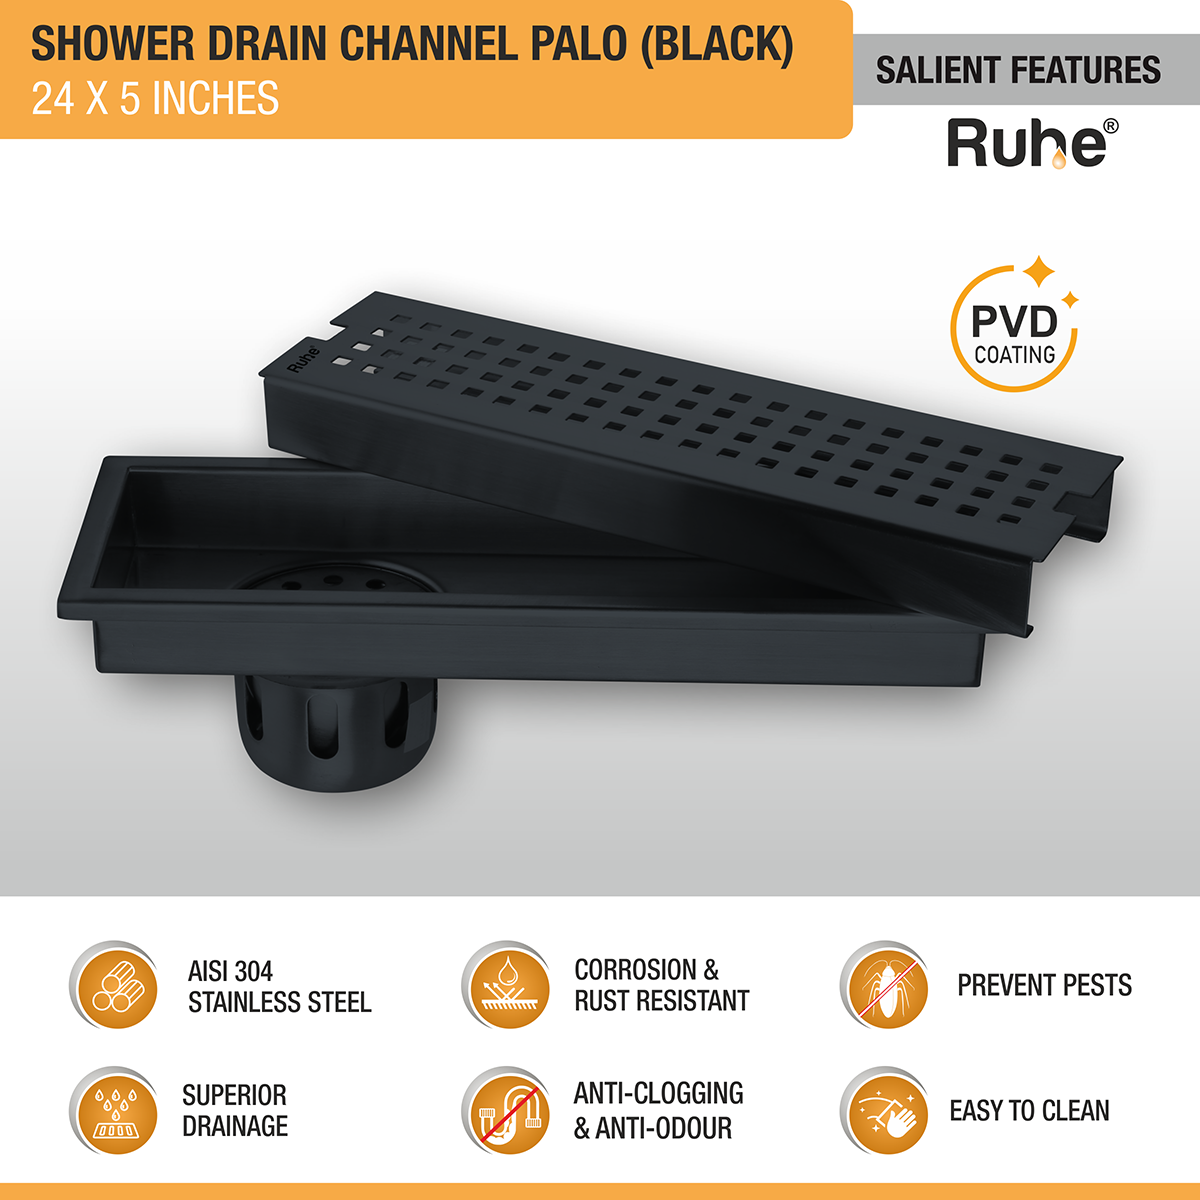 Palo Shower Drain Channel (24 x 5 Inches) Black PVD Coated features and benefits